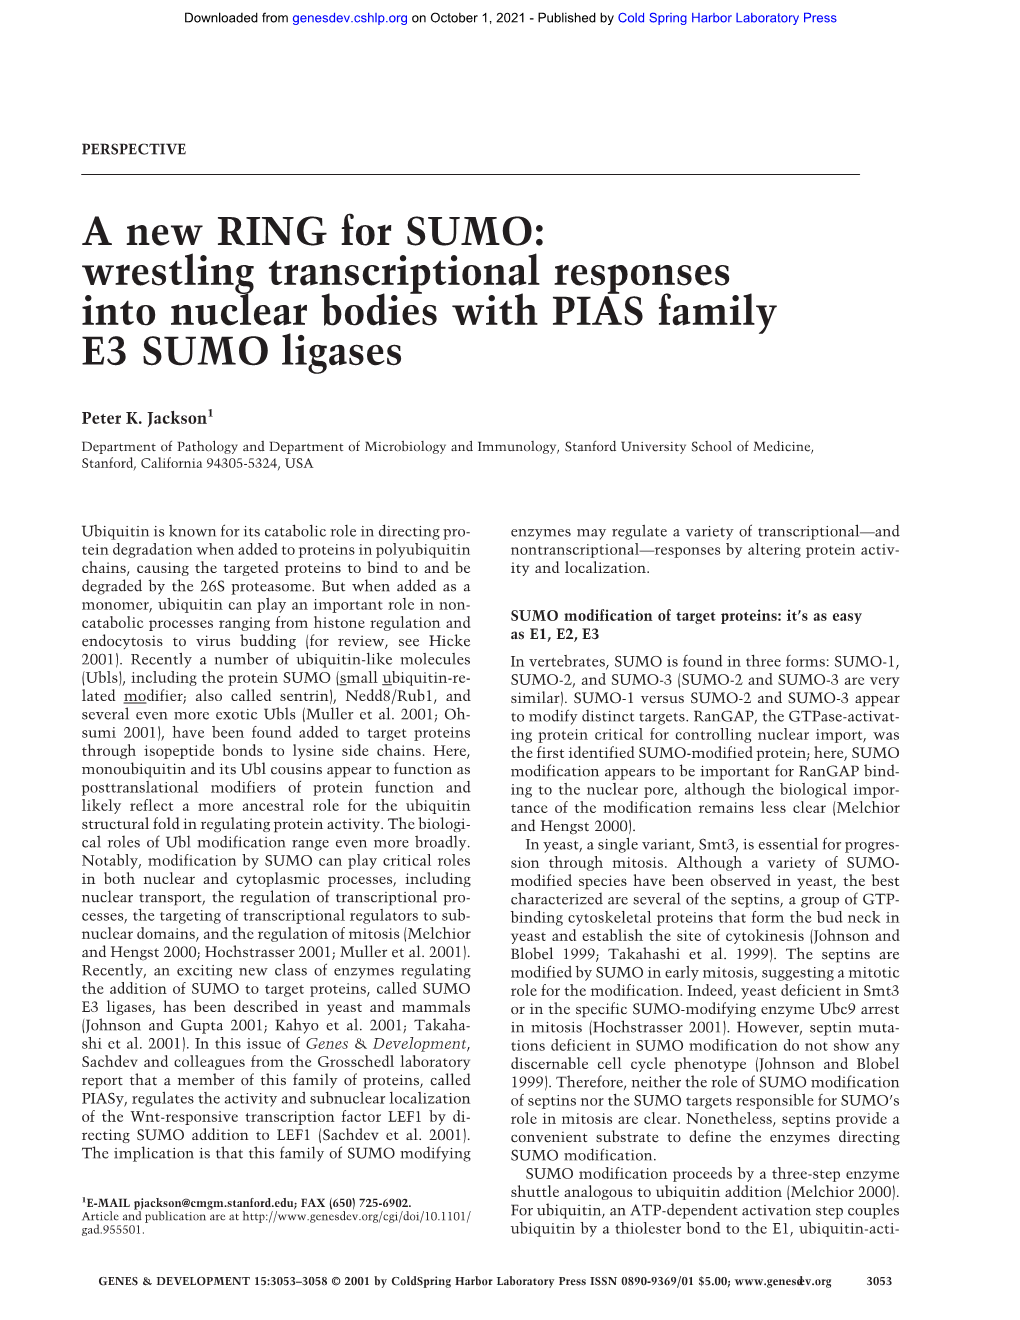 A New RING for SUMO: Wrestling Transcriptional Responses Into Nuclear Bodies with PIAS Family E3 SUMO Ligases